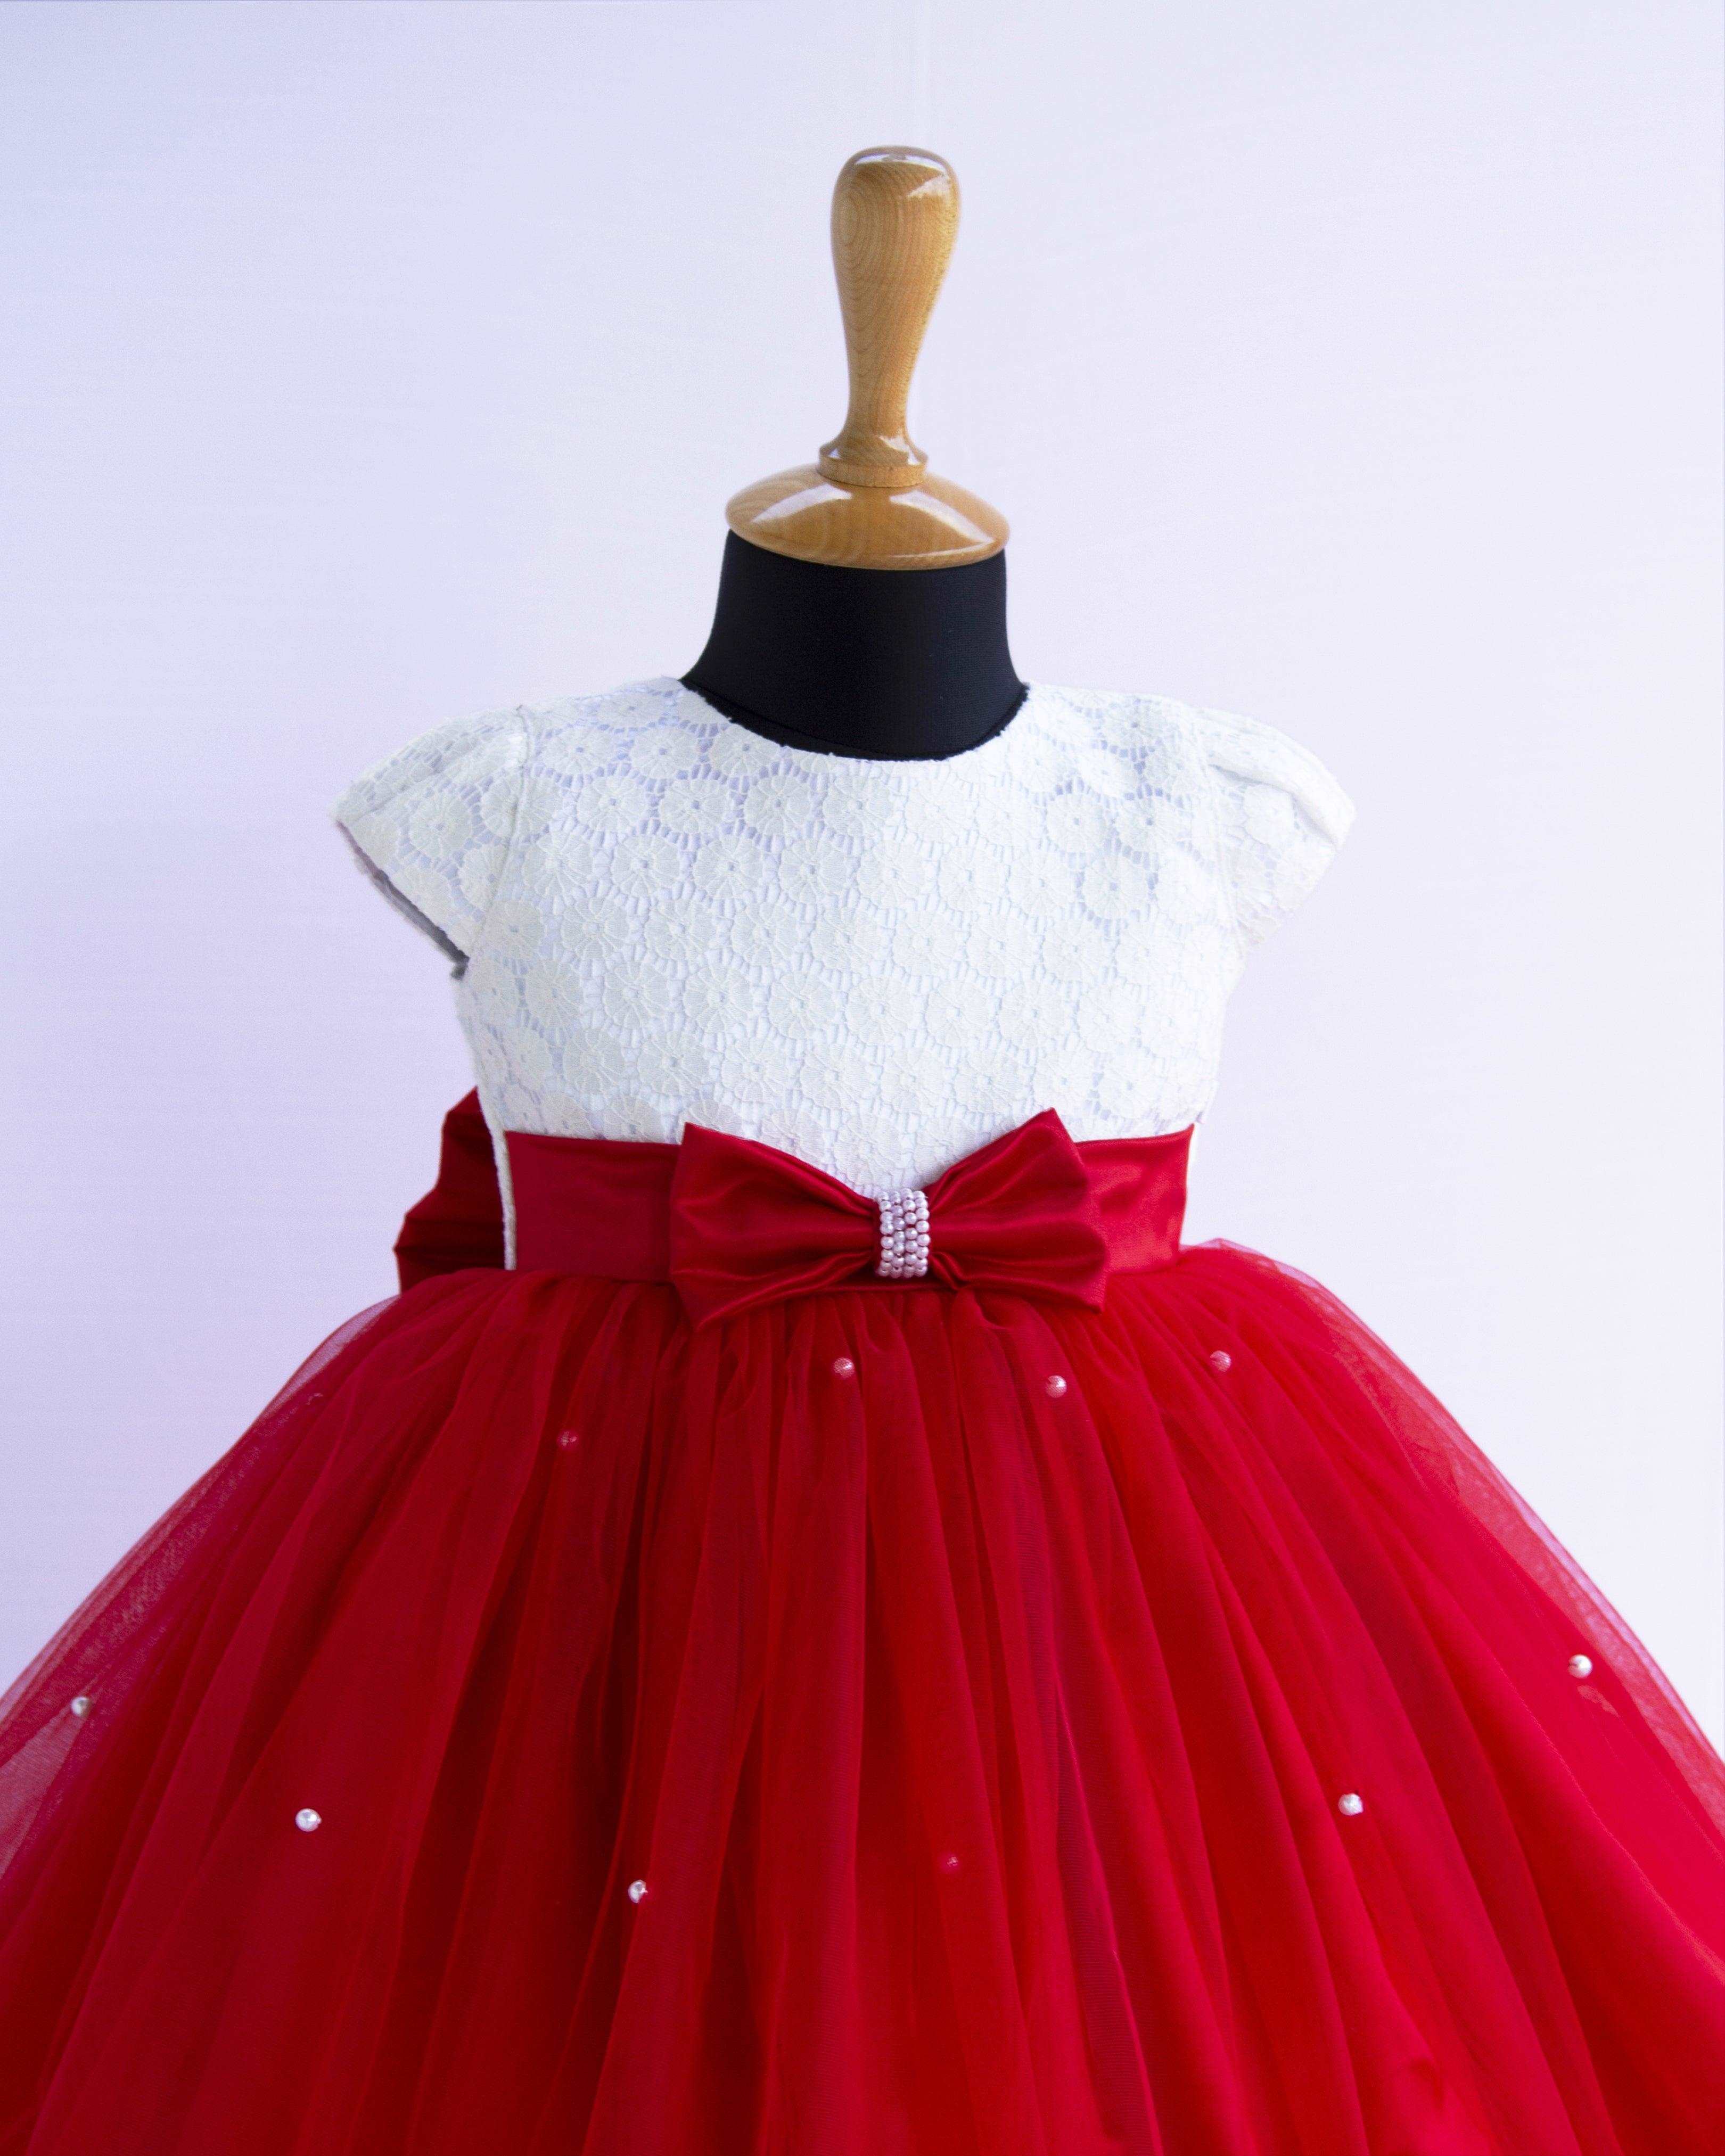 Buy Ministitch Designer Soild Red dress with bow embellished multifrilled  tail dress for baby Girls Online - Mini Stitch